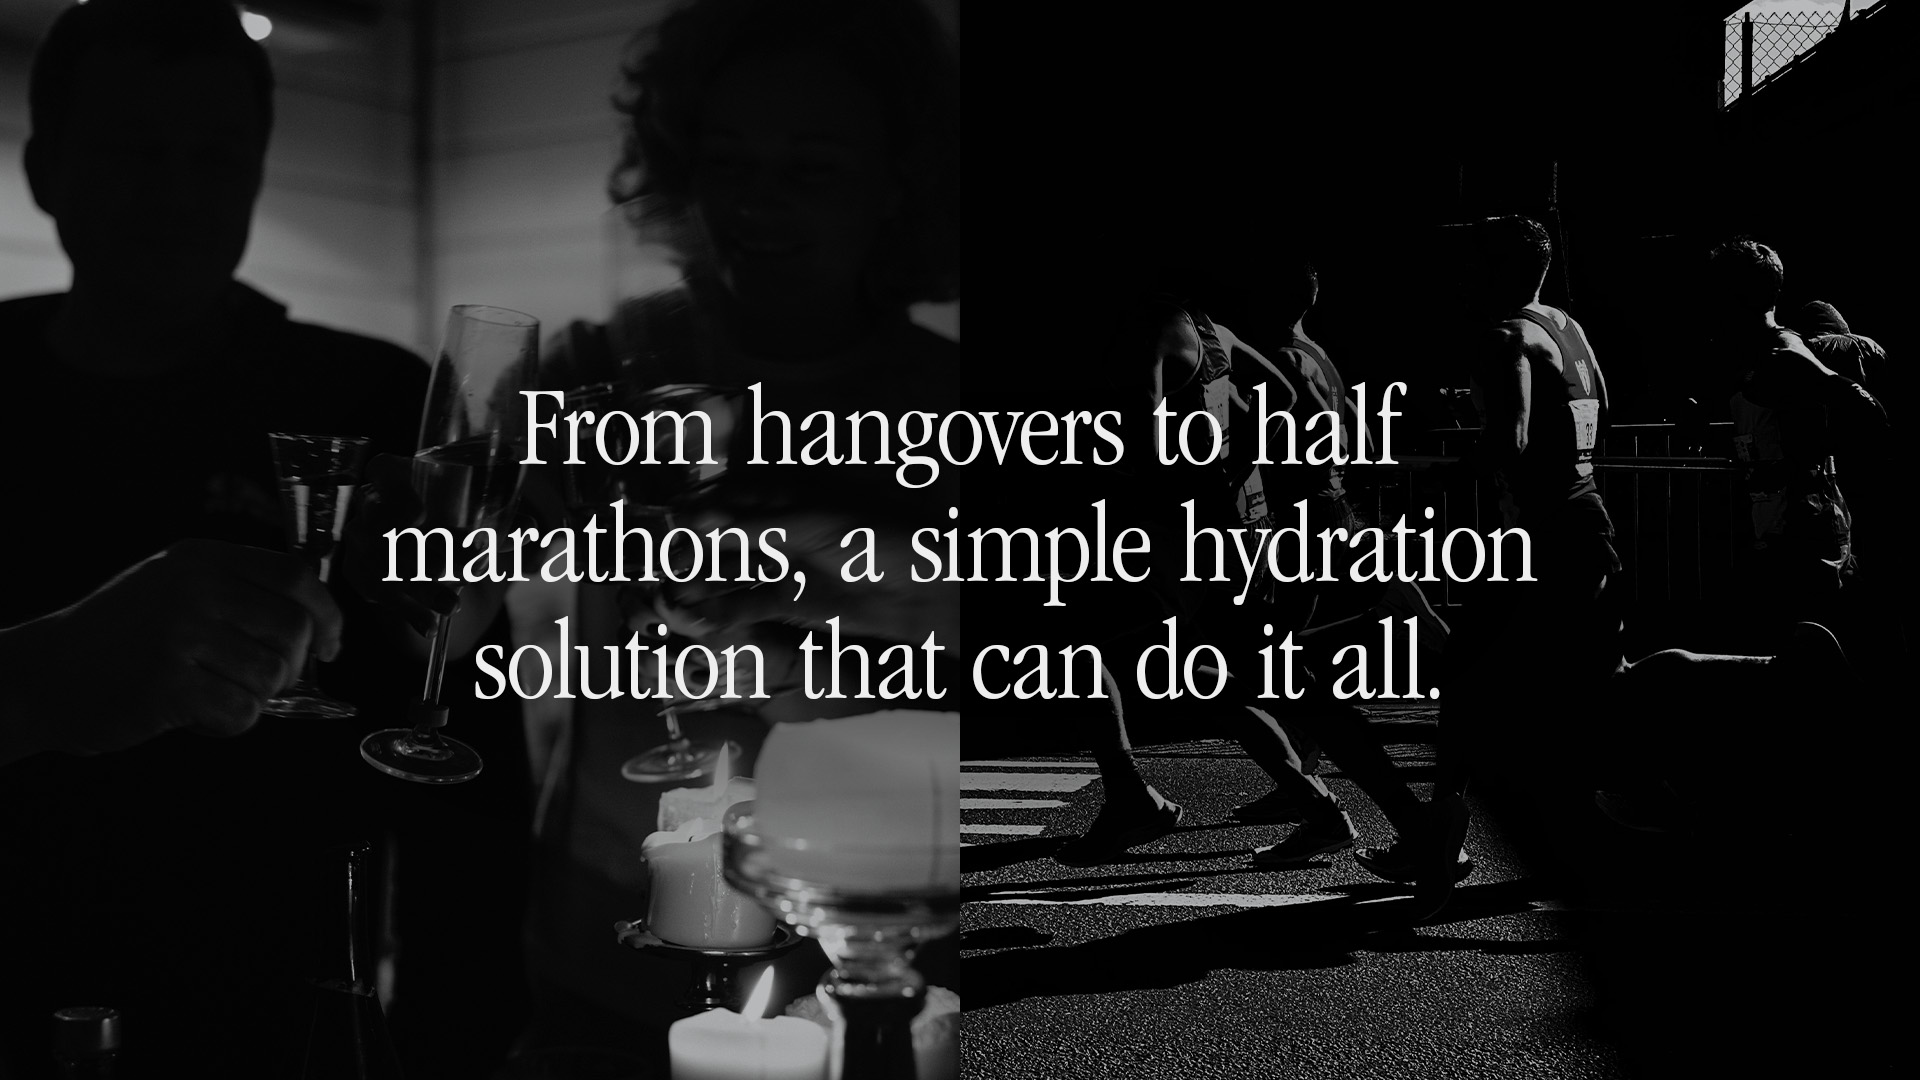 Elyte's core message over an image of drinks and an exercise.